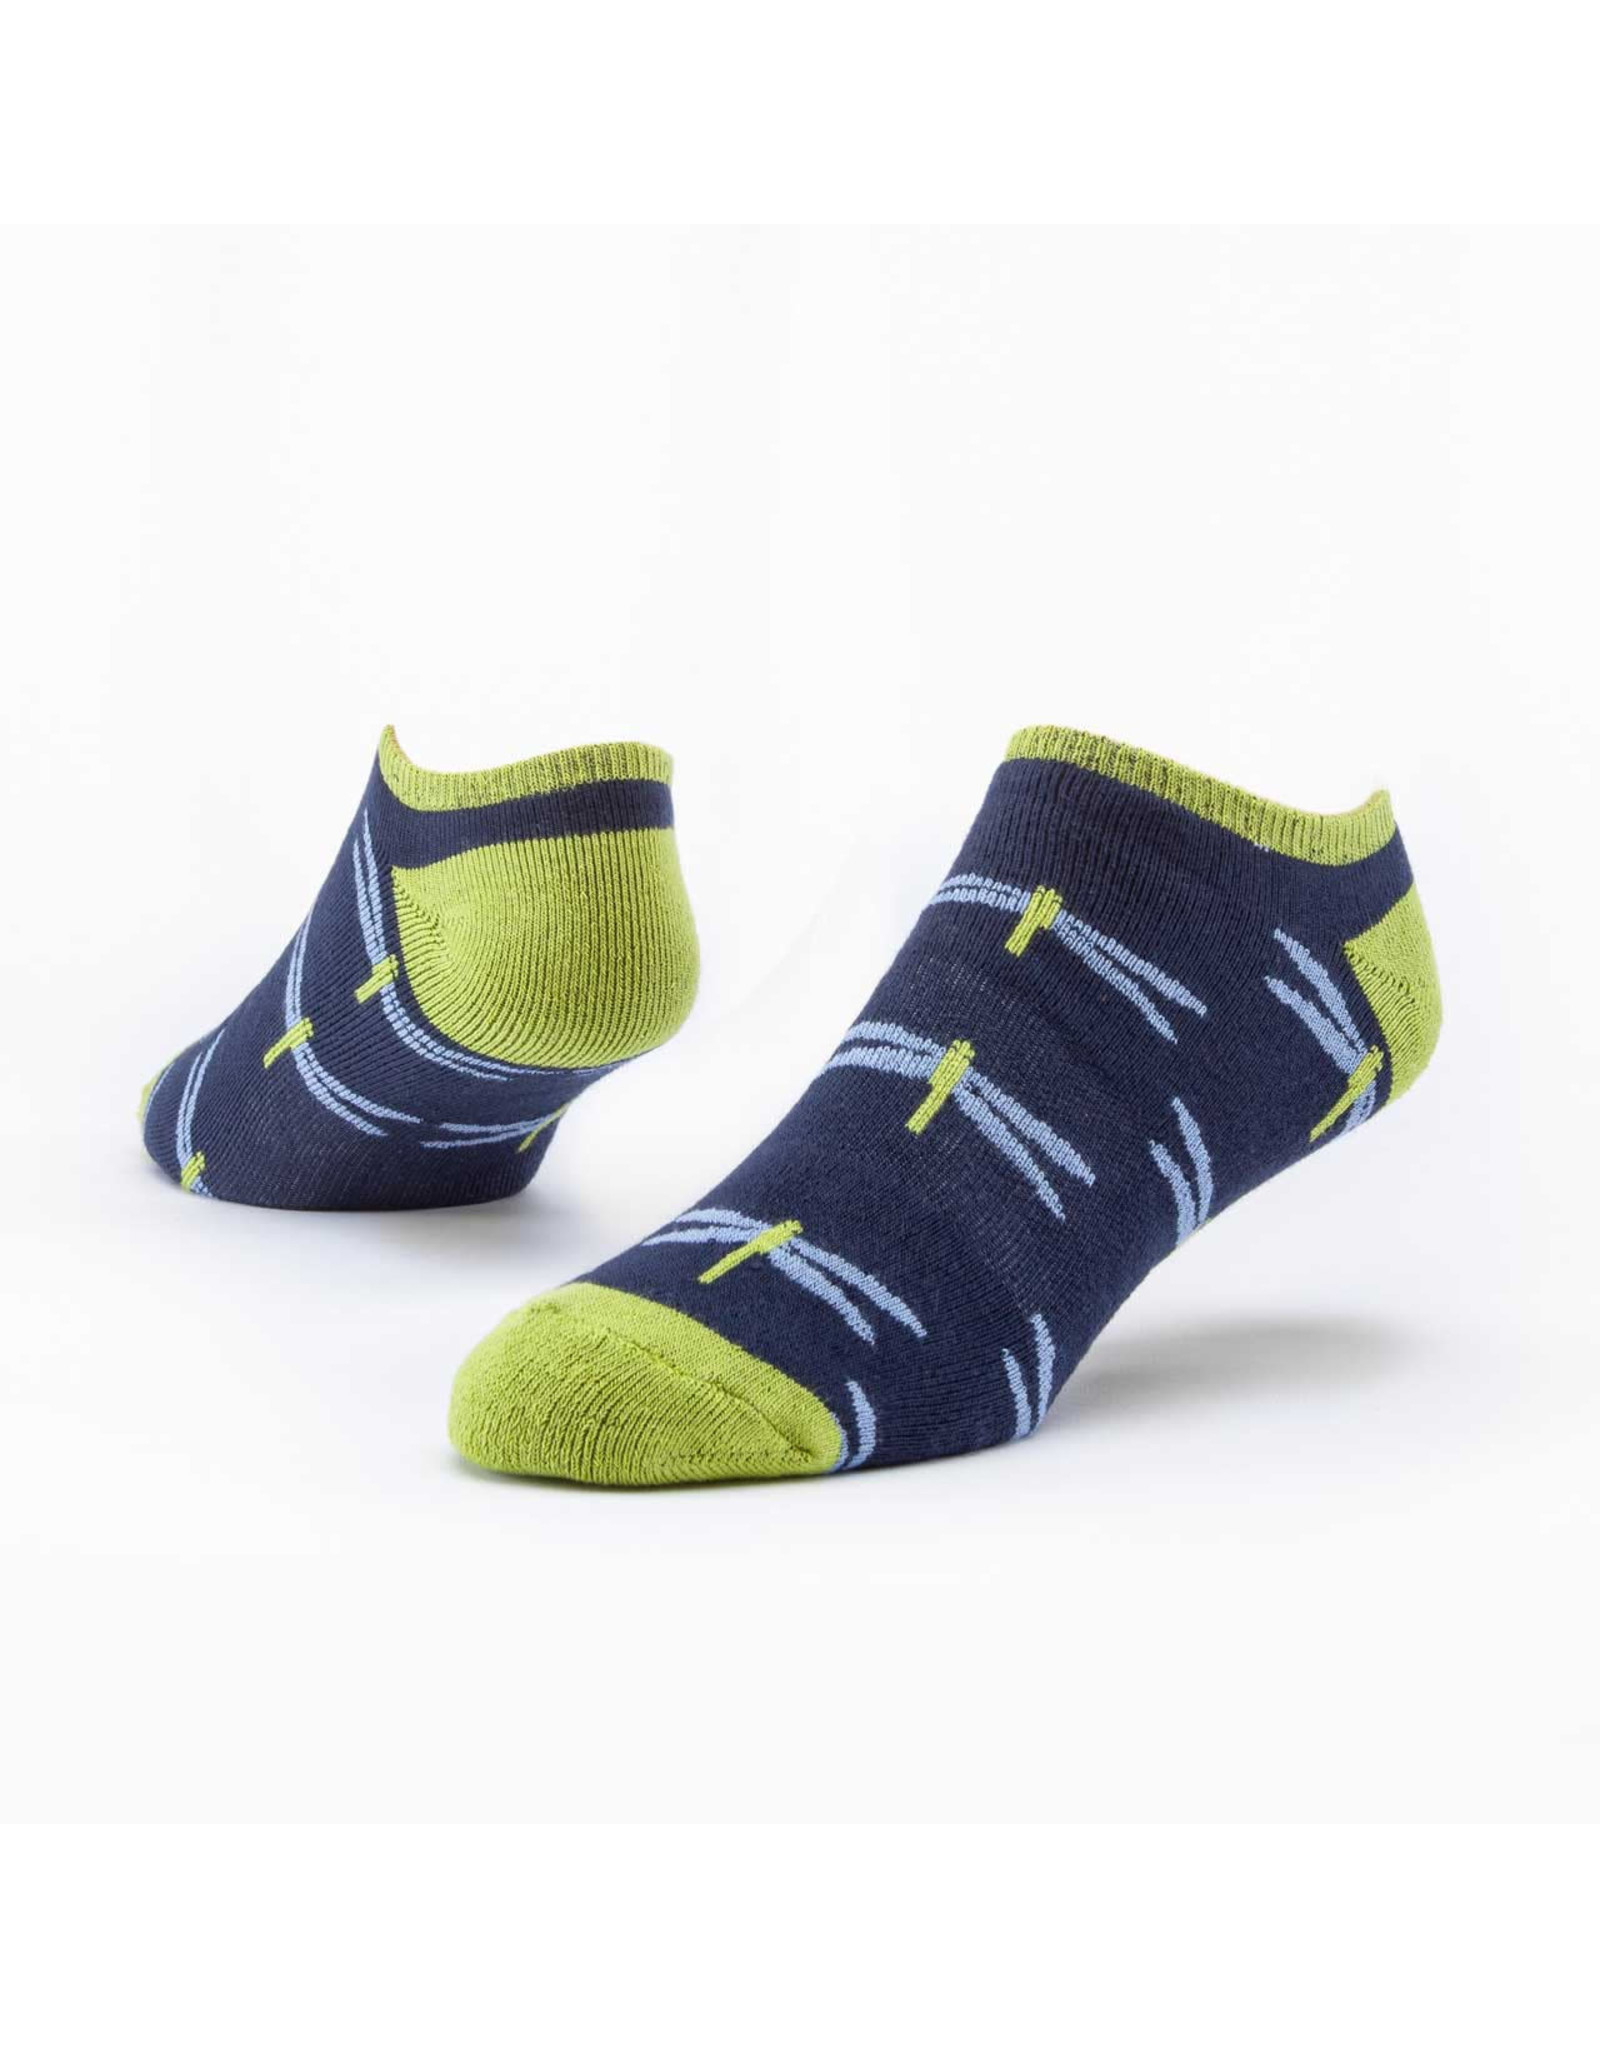 Trade roots Cotton Footies, Ankle Size